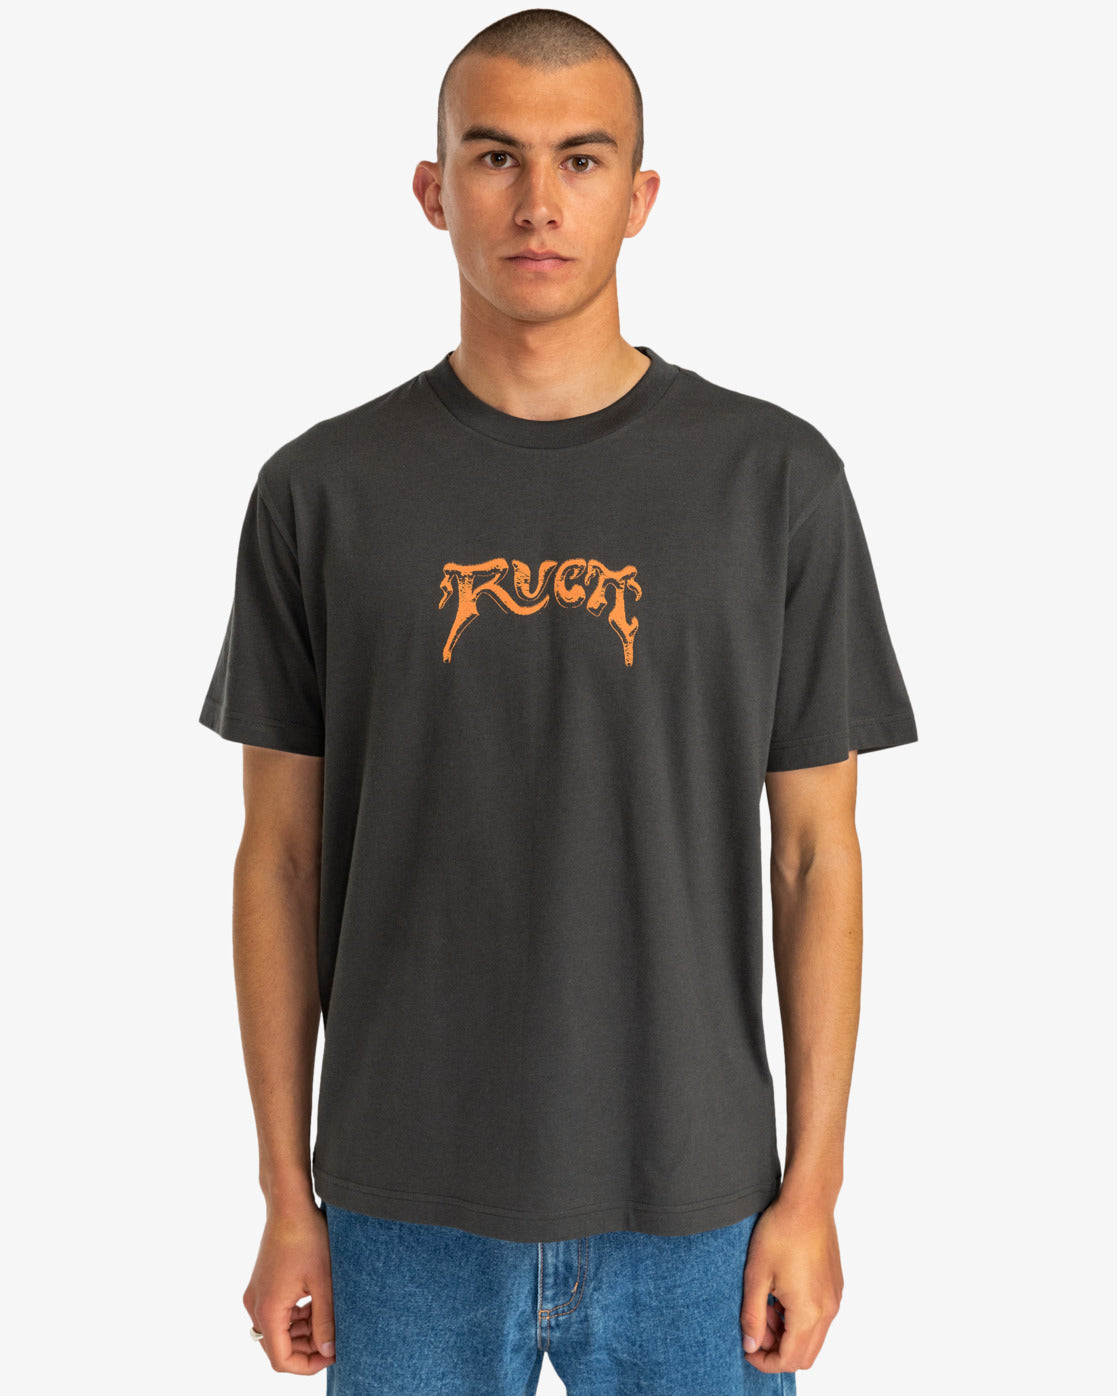 RVCA Unearthed SS TEE - Pirate Black